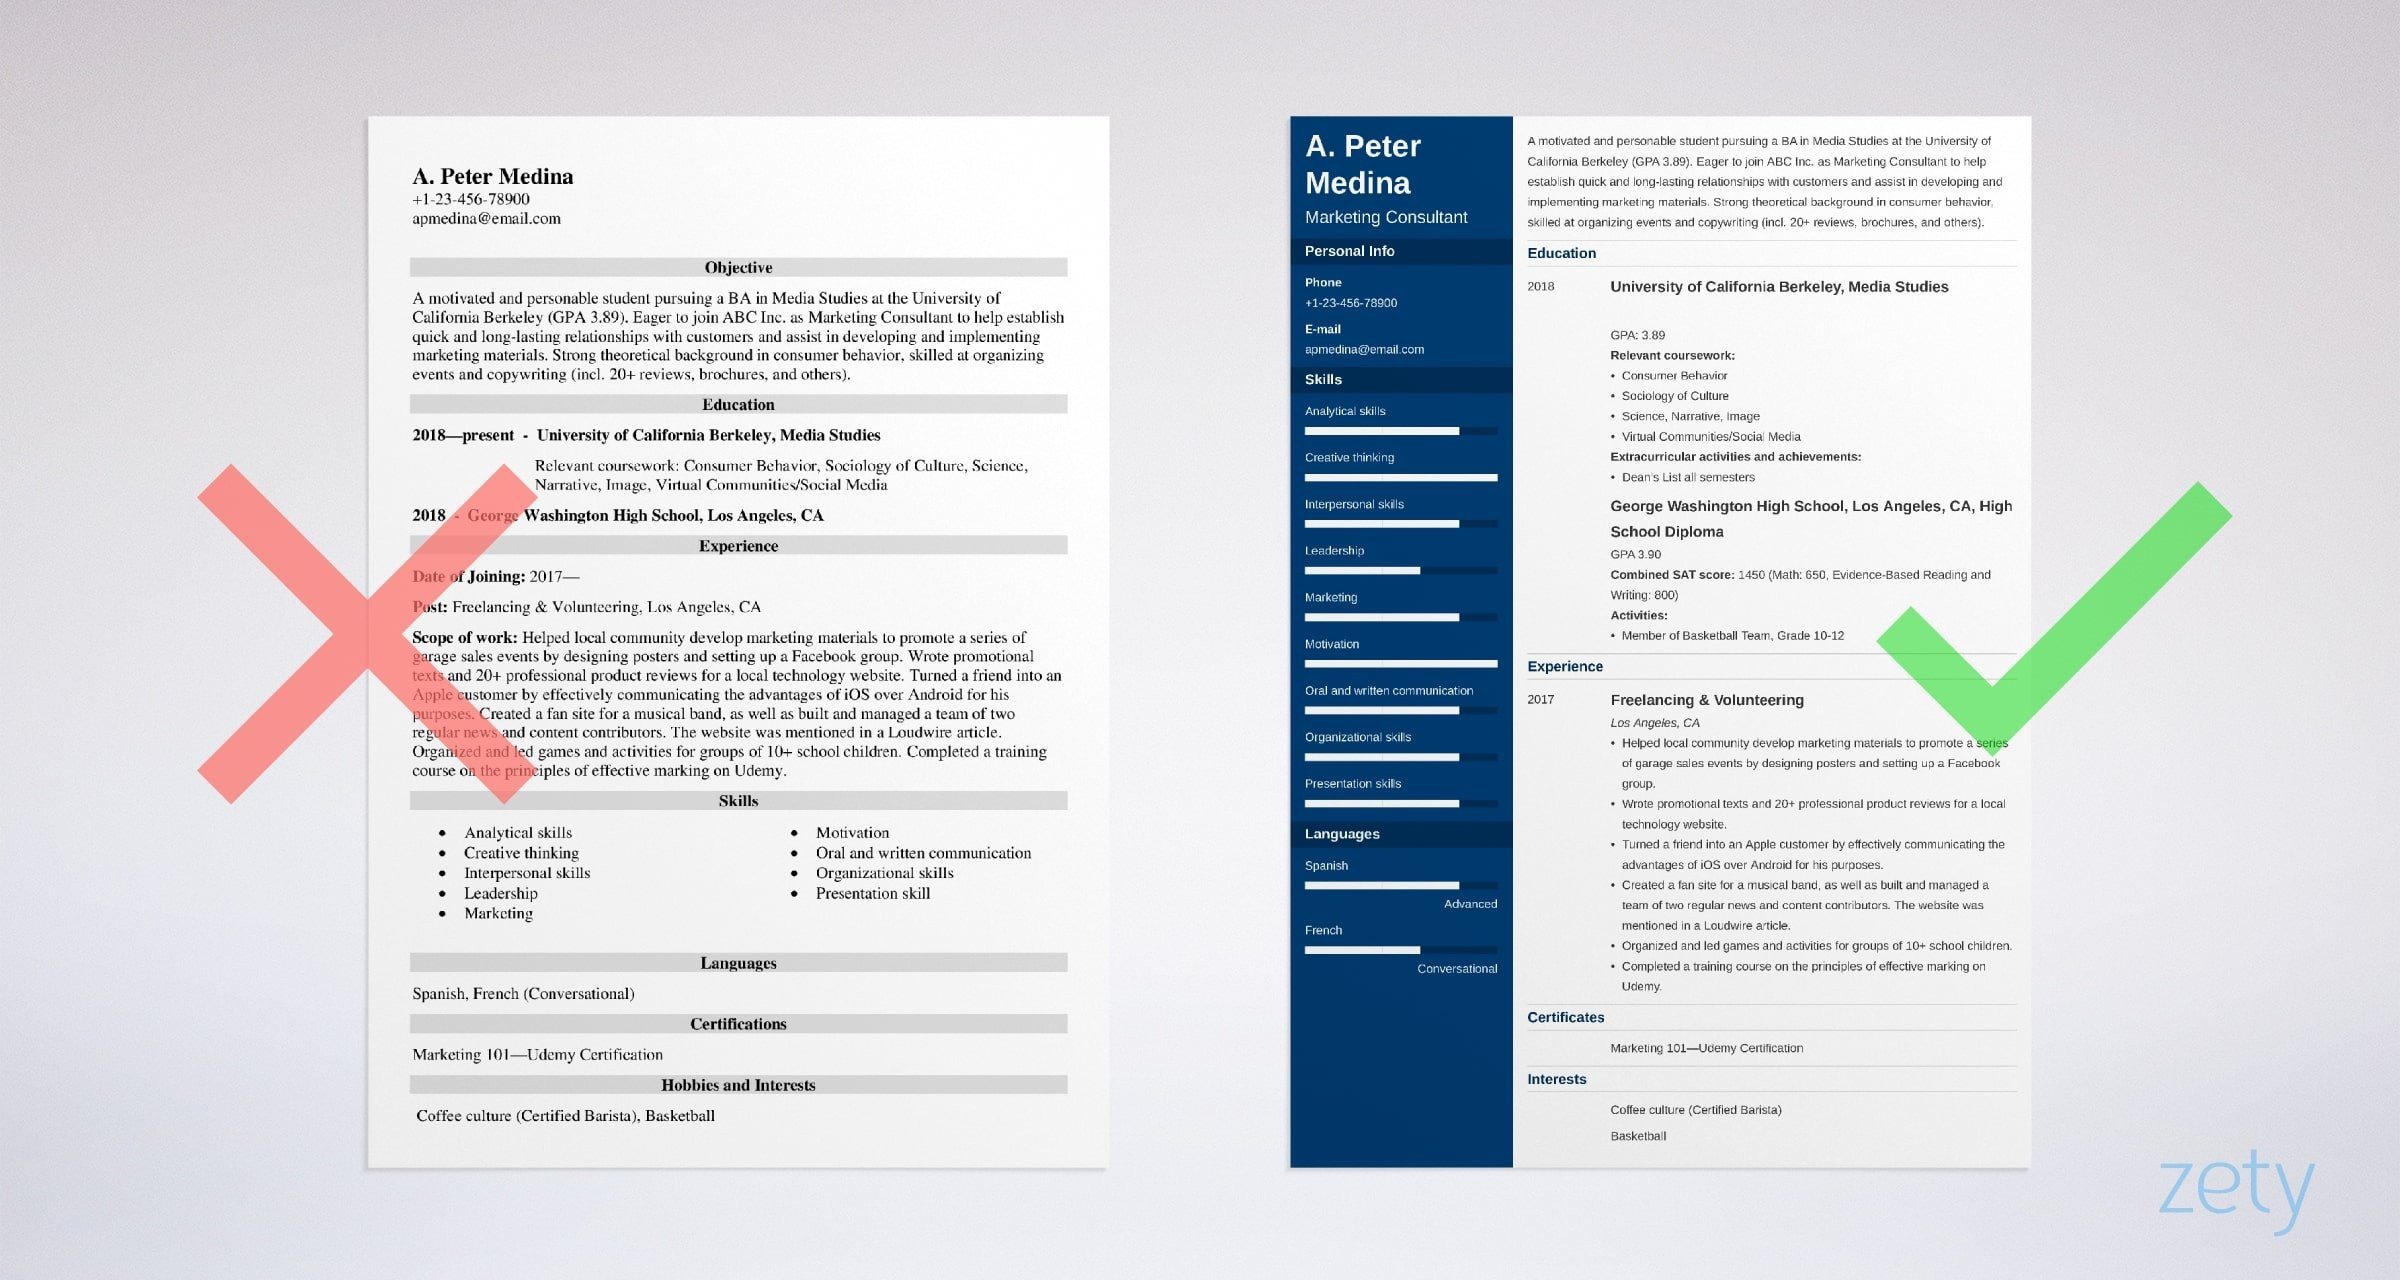 First Job No Experience Resume Sample How to Make A Resume with No Experience: First Job Examples